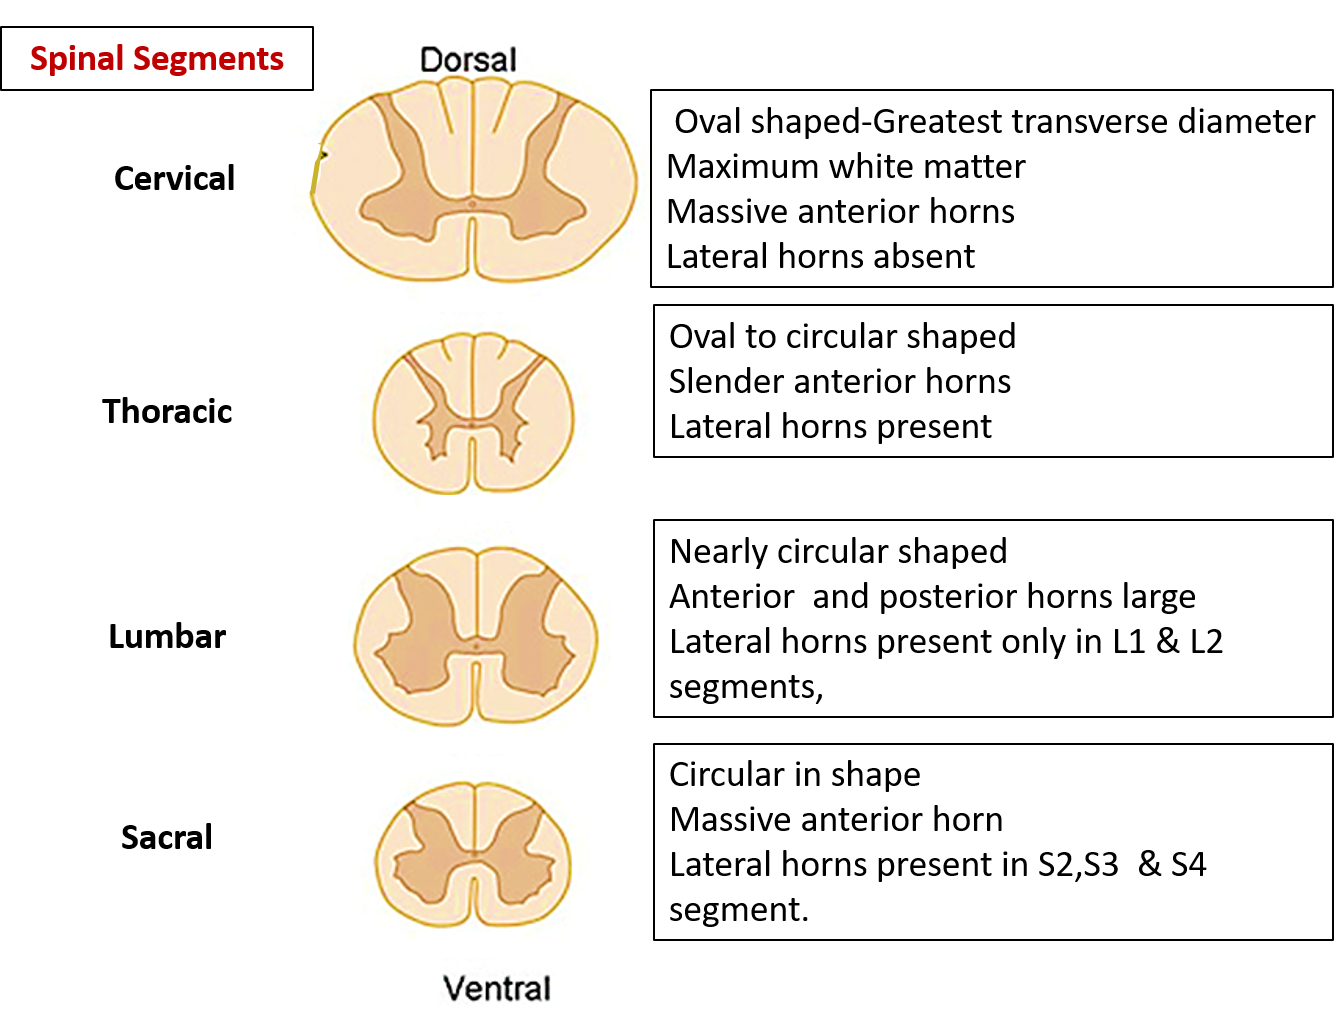  Spinal cord anatomy - regional differences in spinal segments- cervical, thoracic, lumbar and sacral